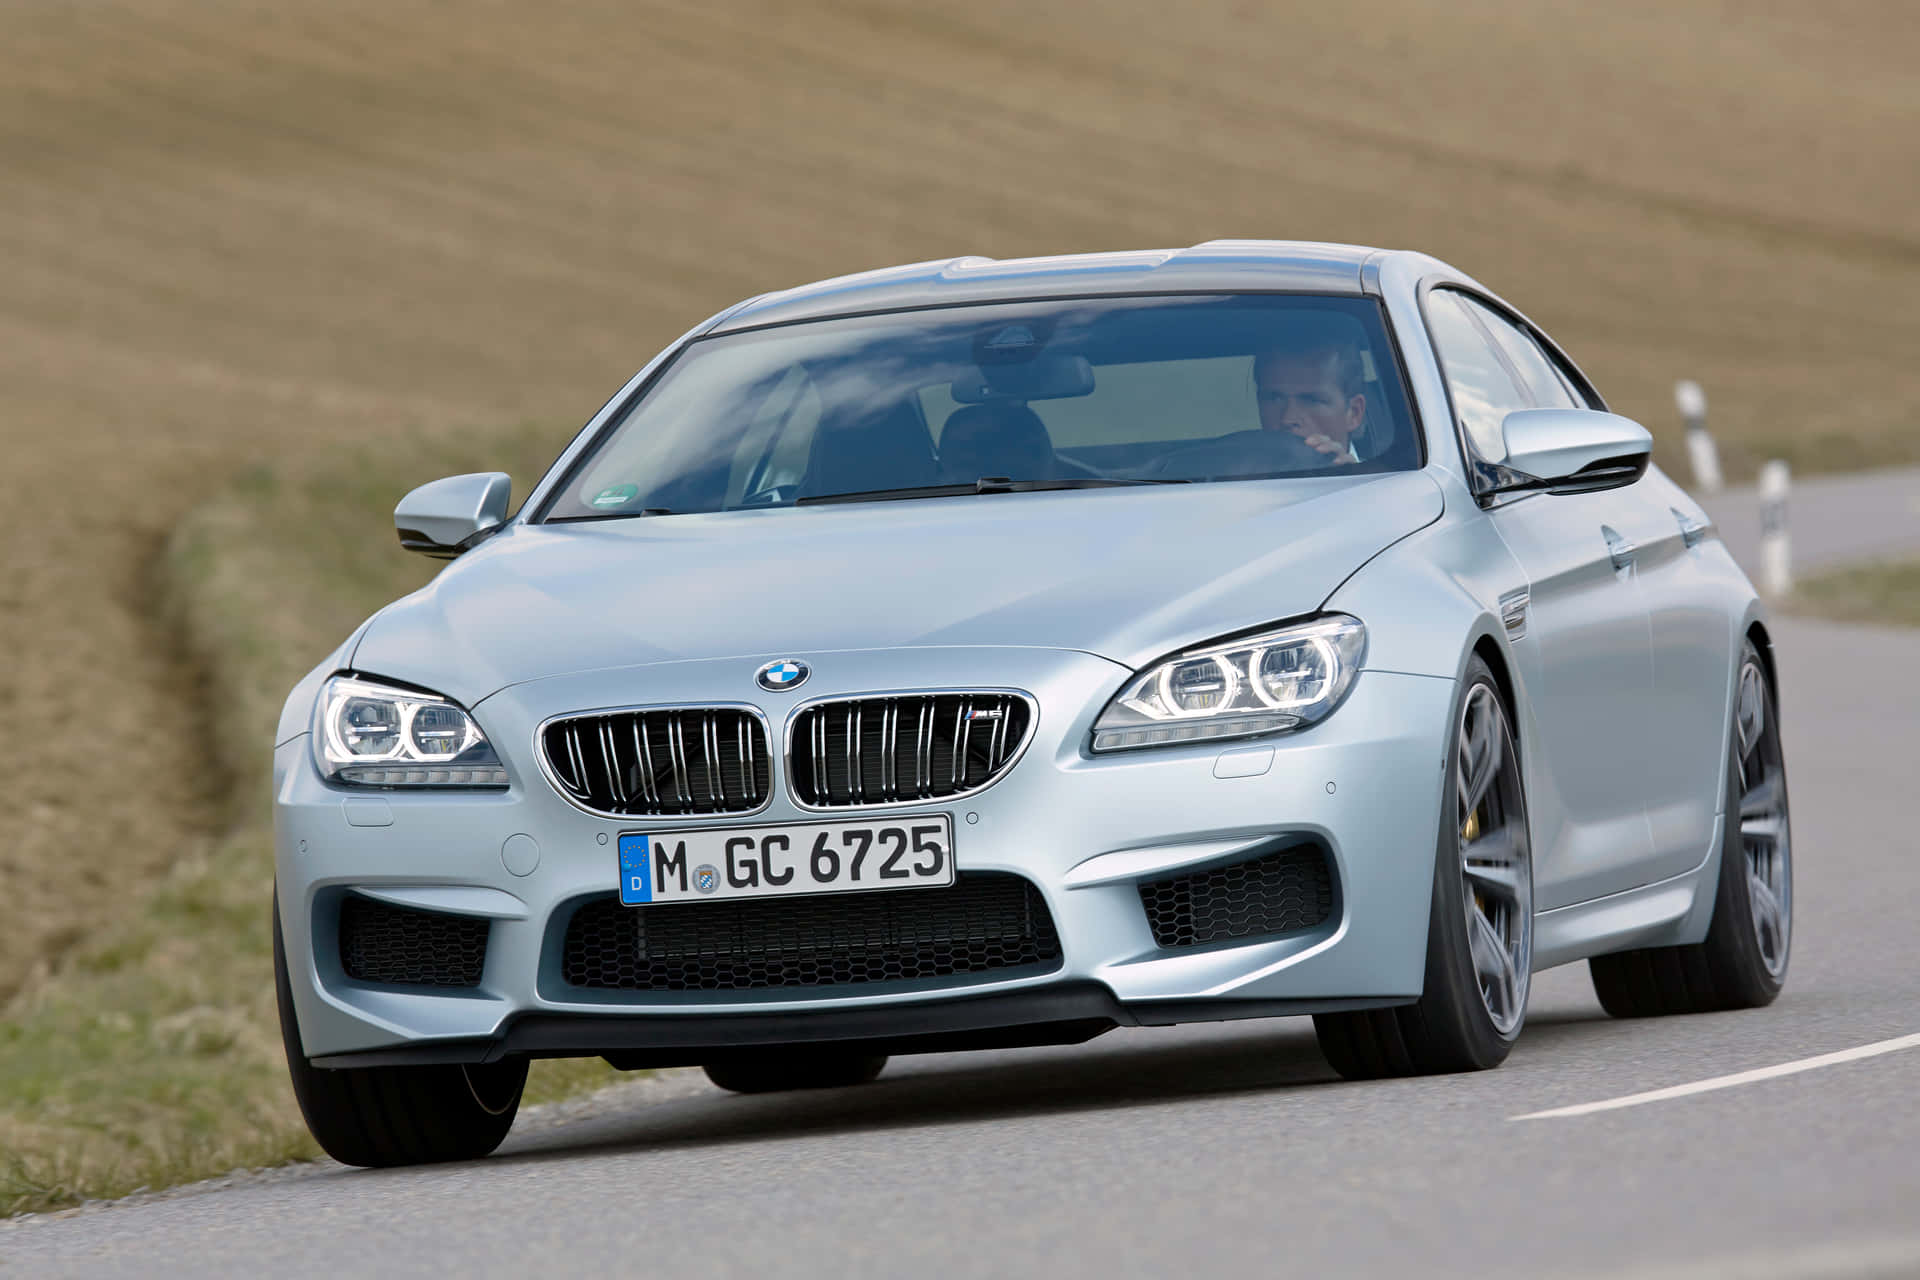 Captivating BMW M6 on the Road Wallpaper